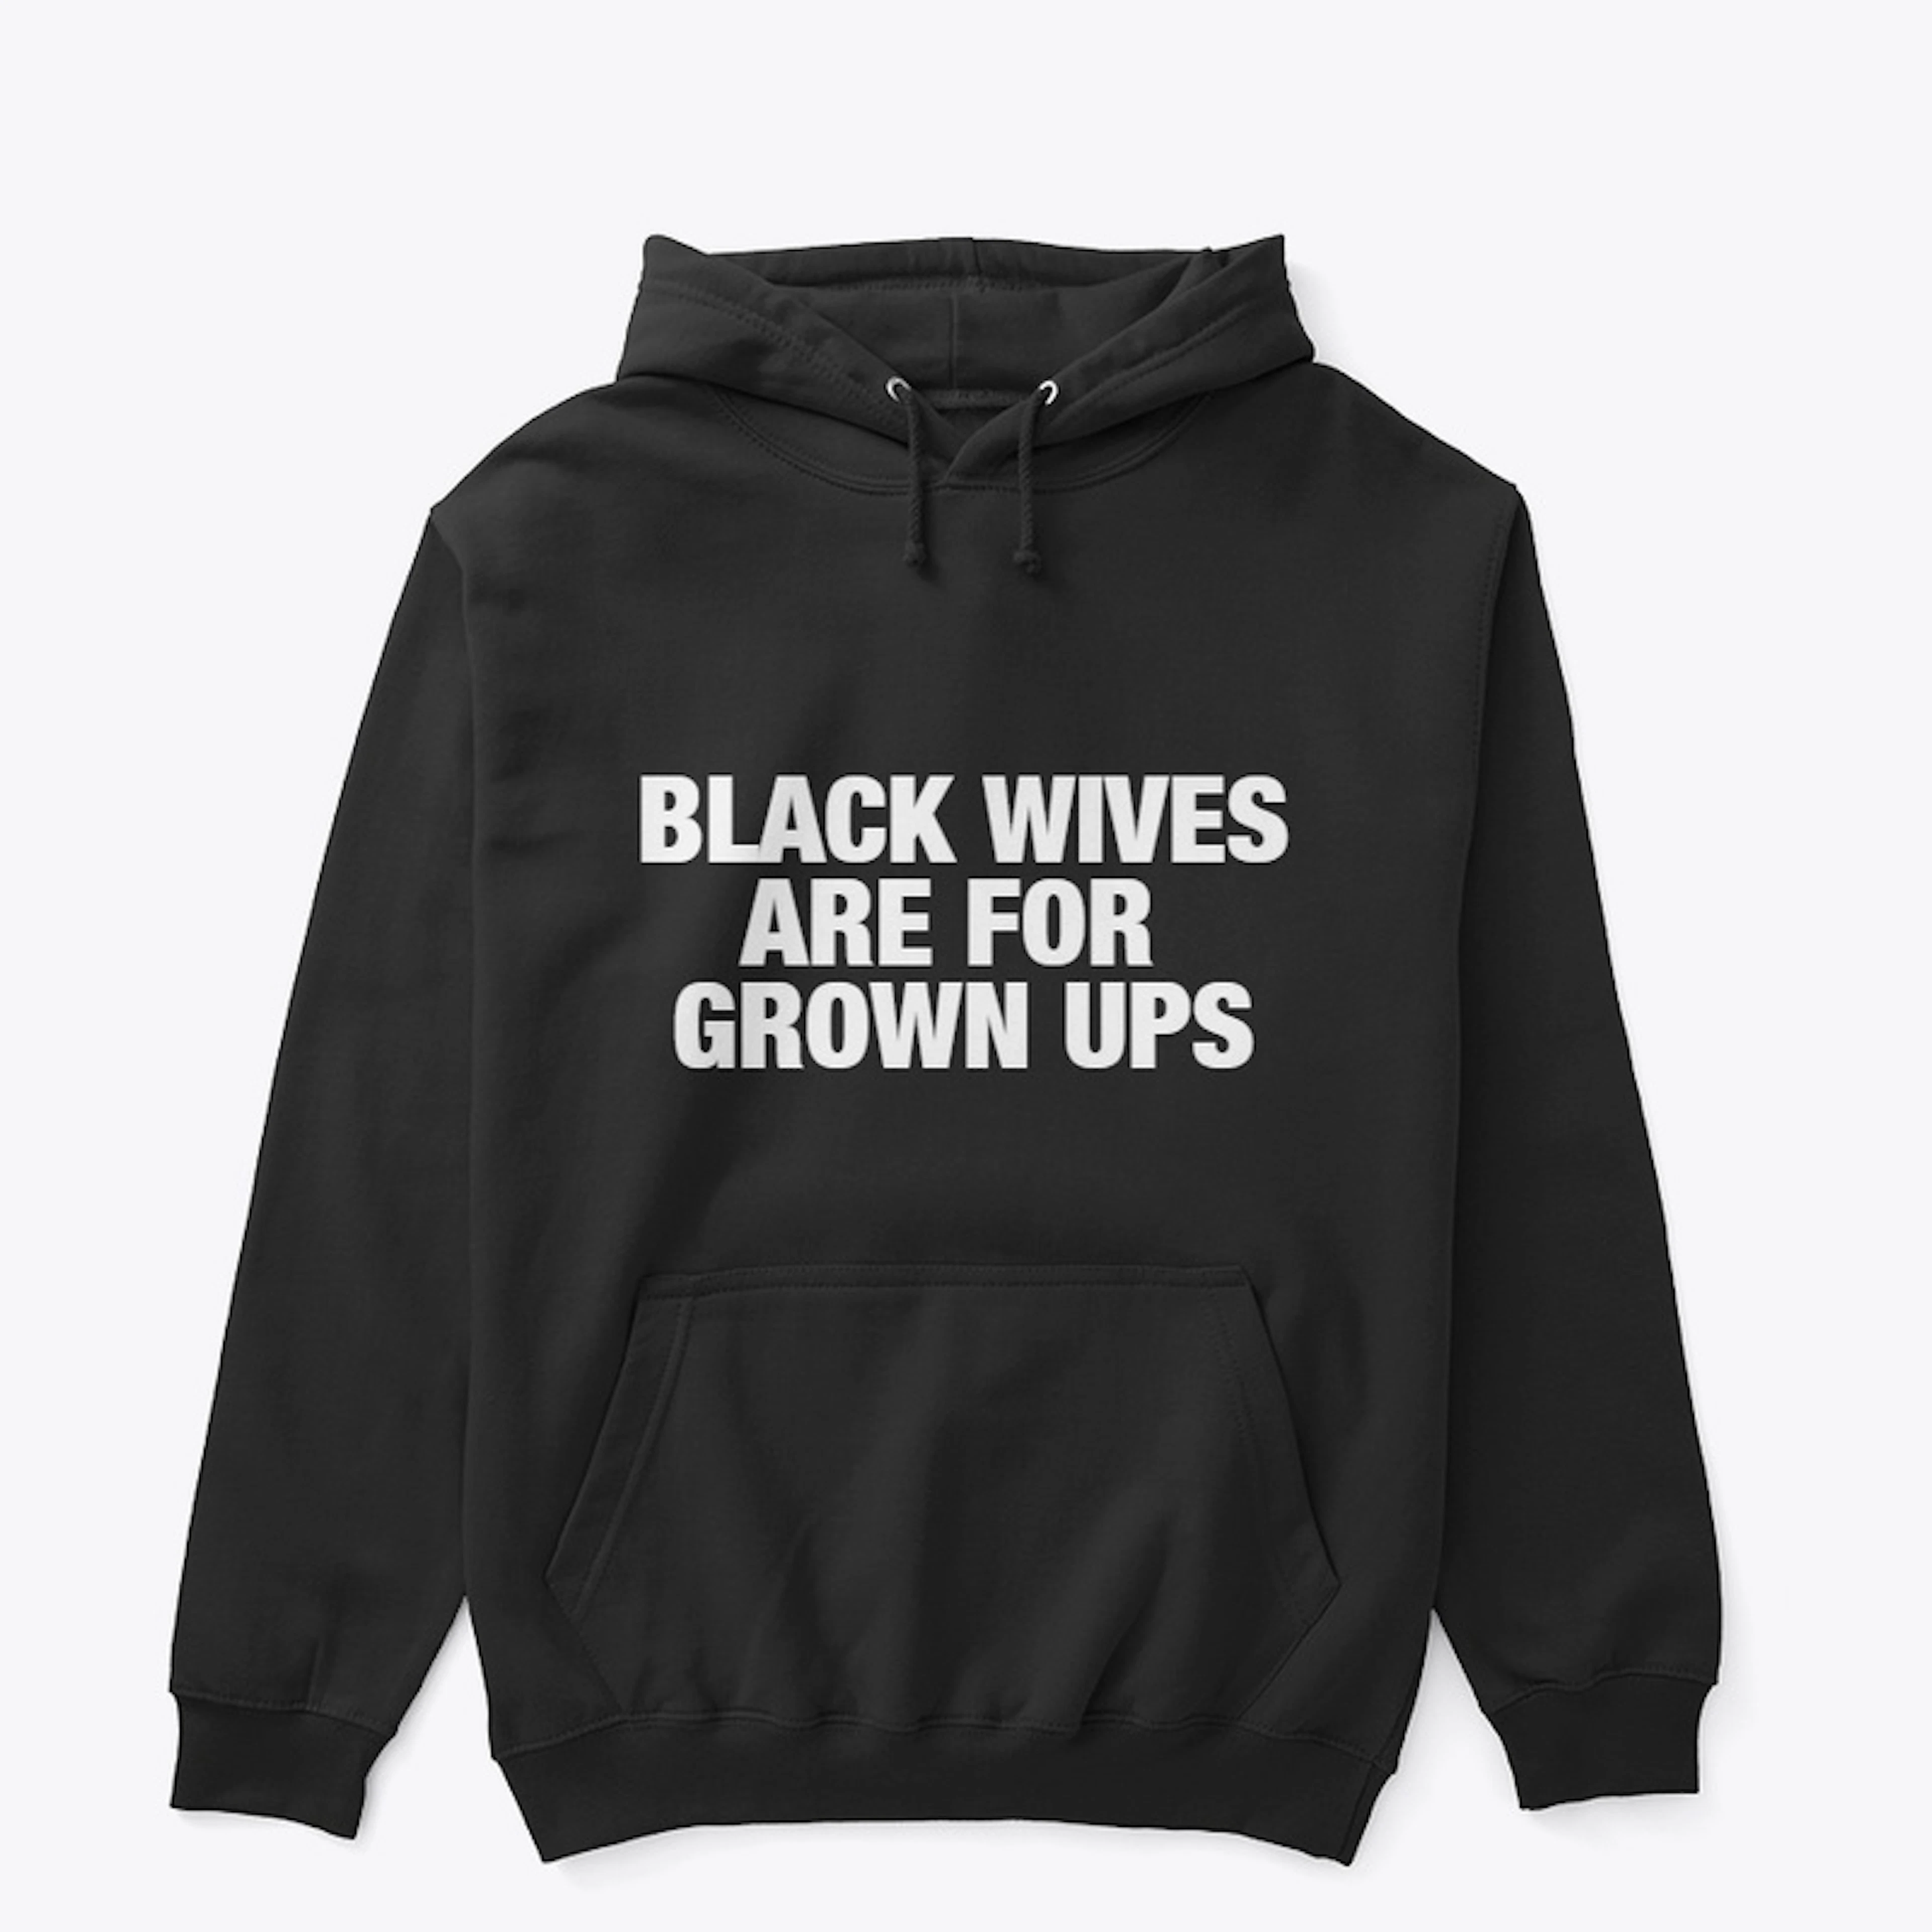 BLACK WIVES ARE FOR GROWN UPS